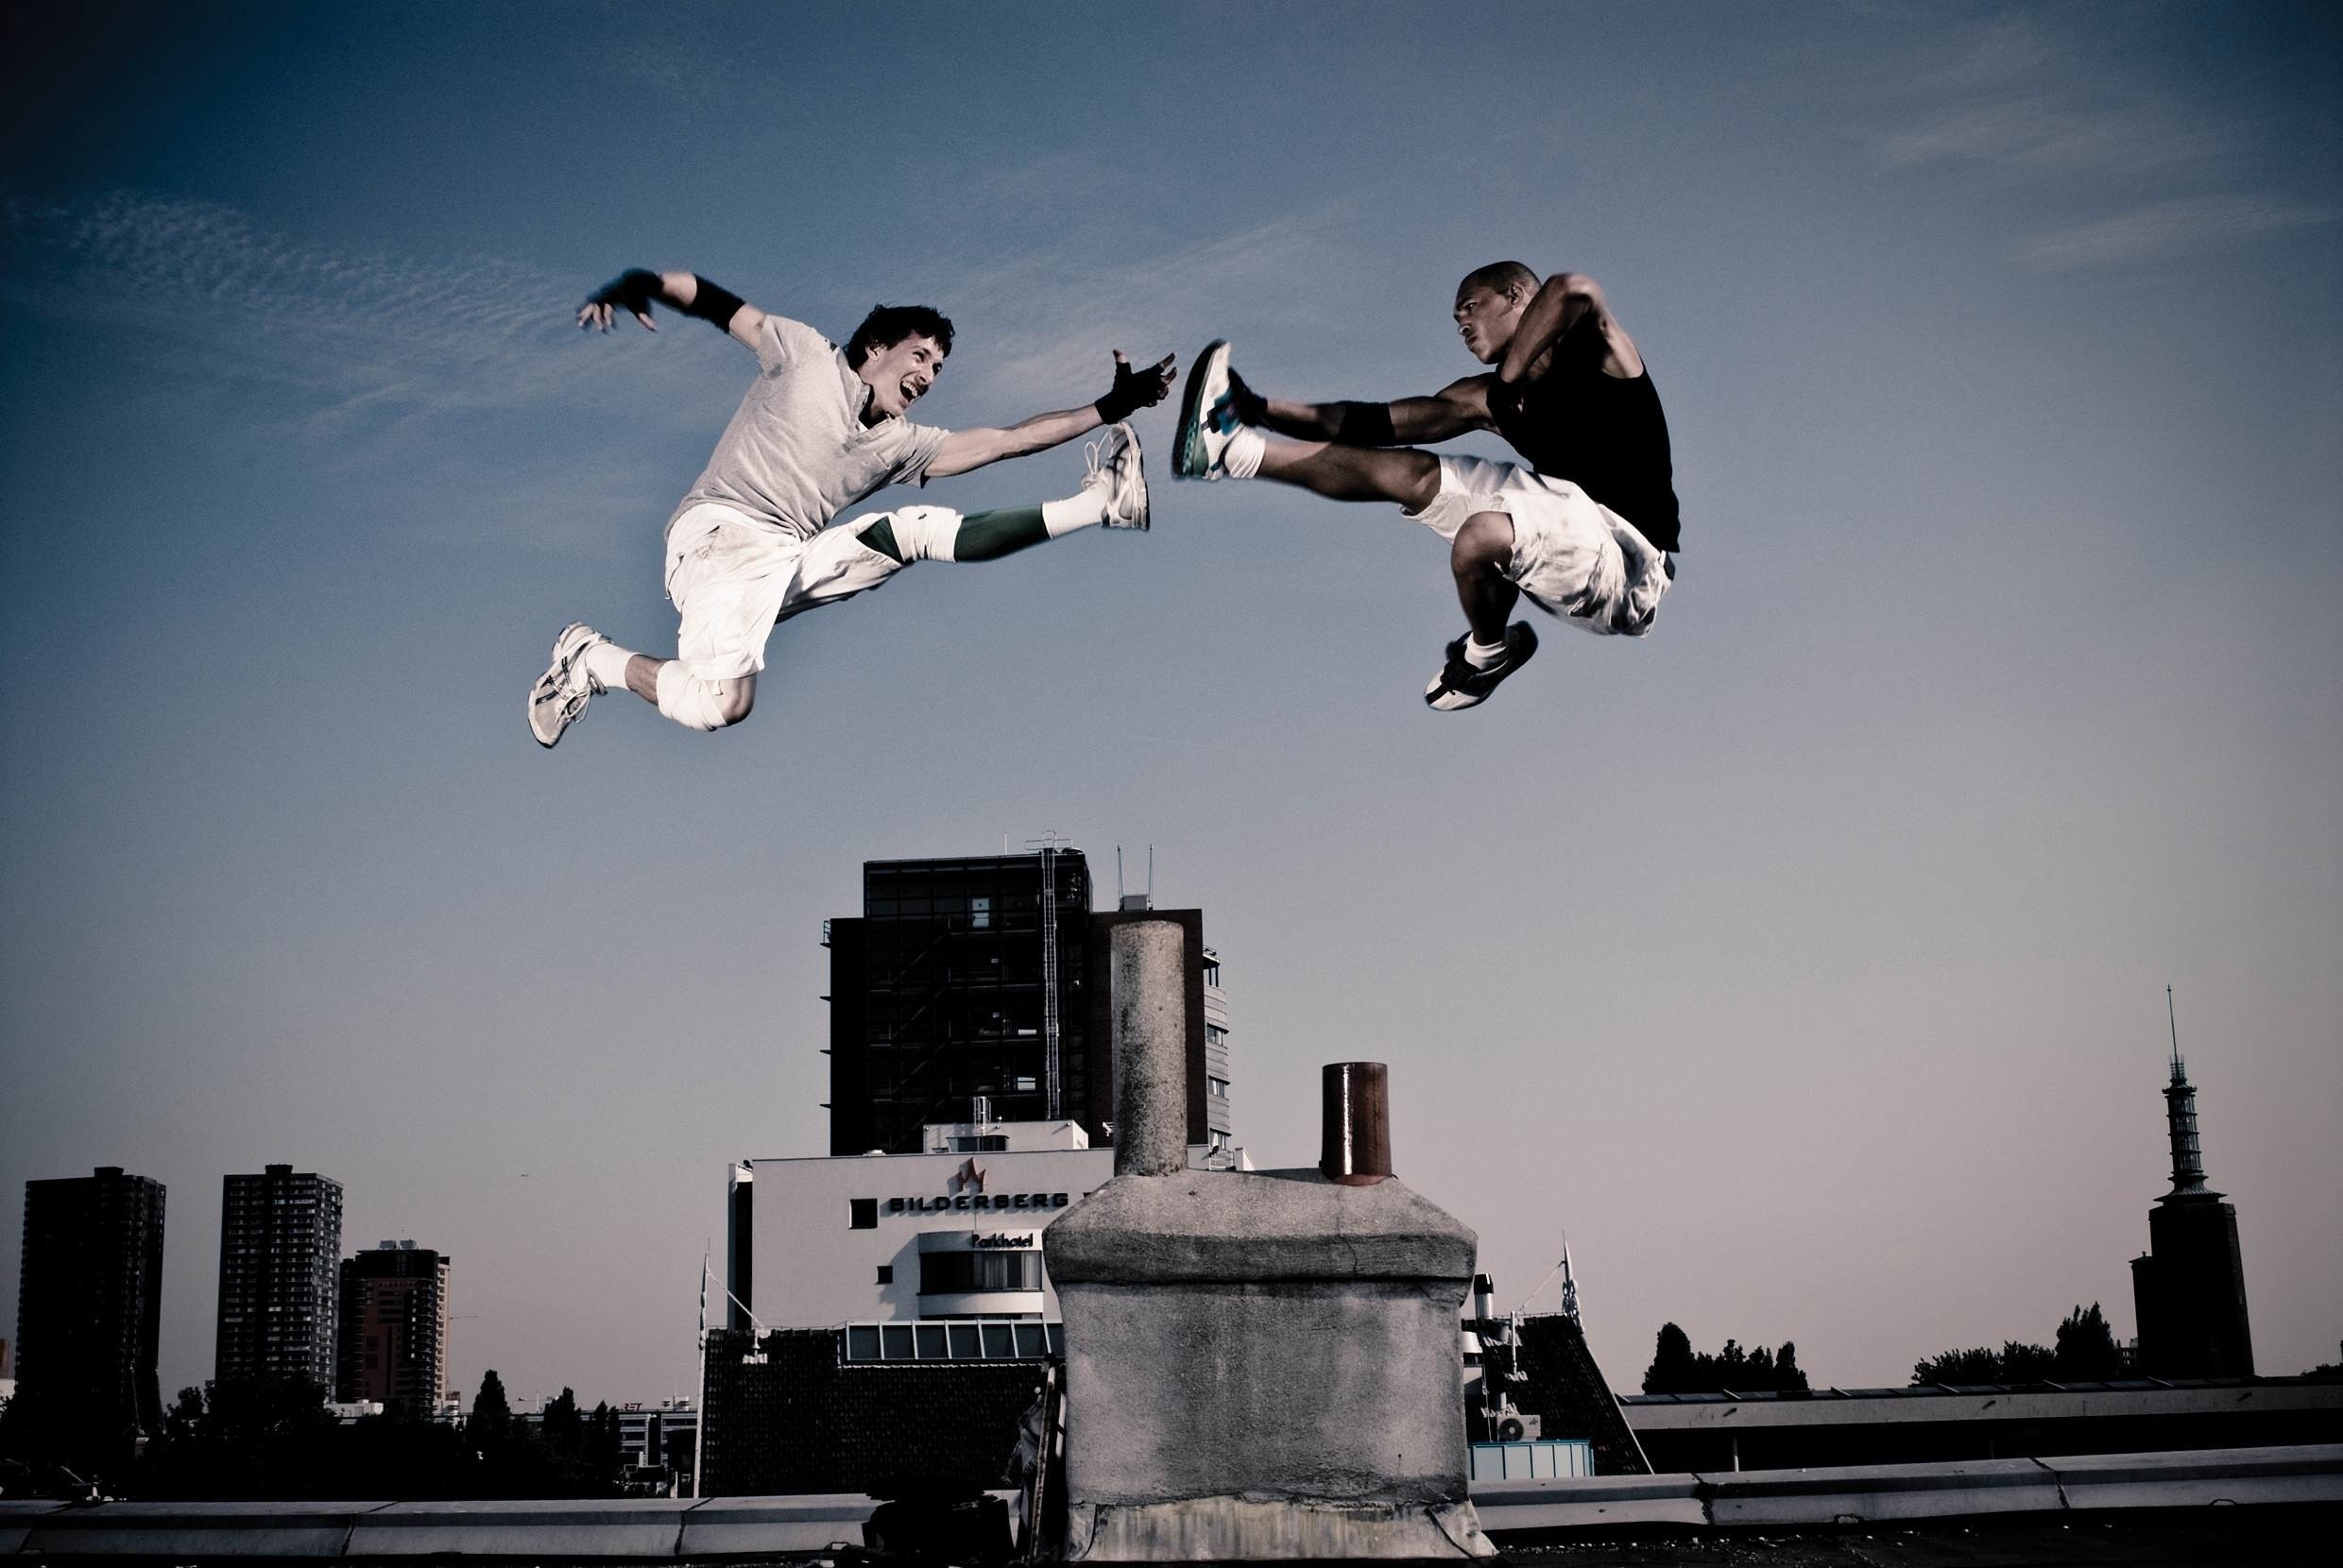 Freerunning: Artistry over efficiency and speed, Parkour in duo, Dance elements. 2480x1660 HD Background.